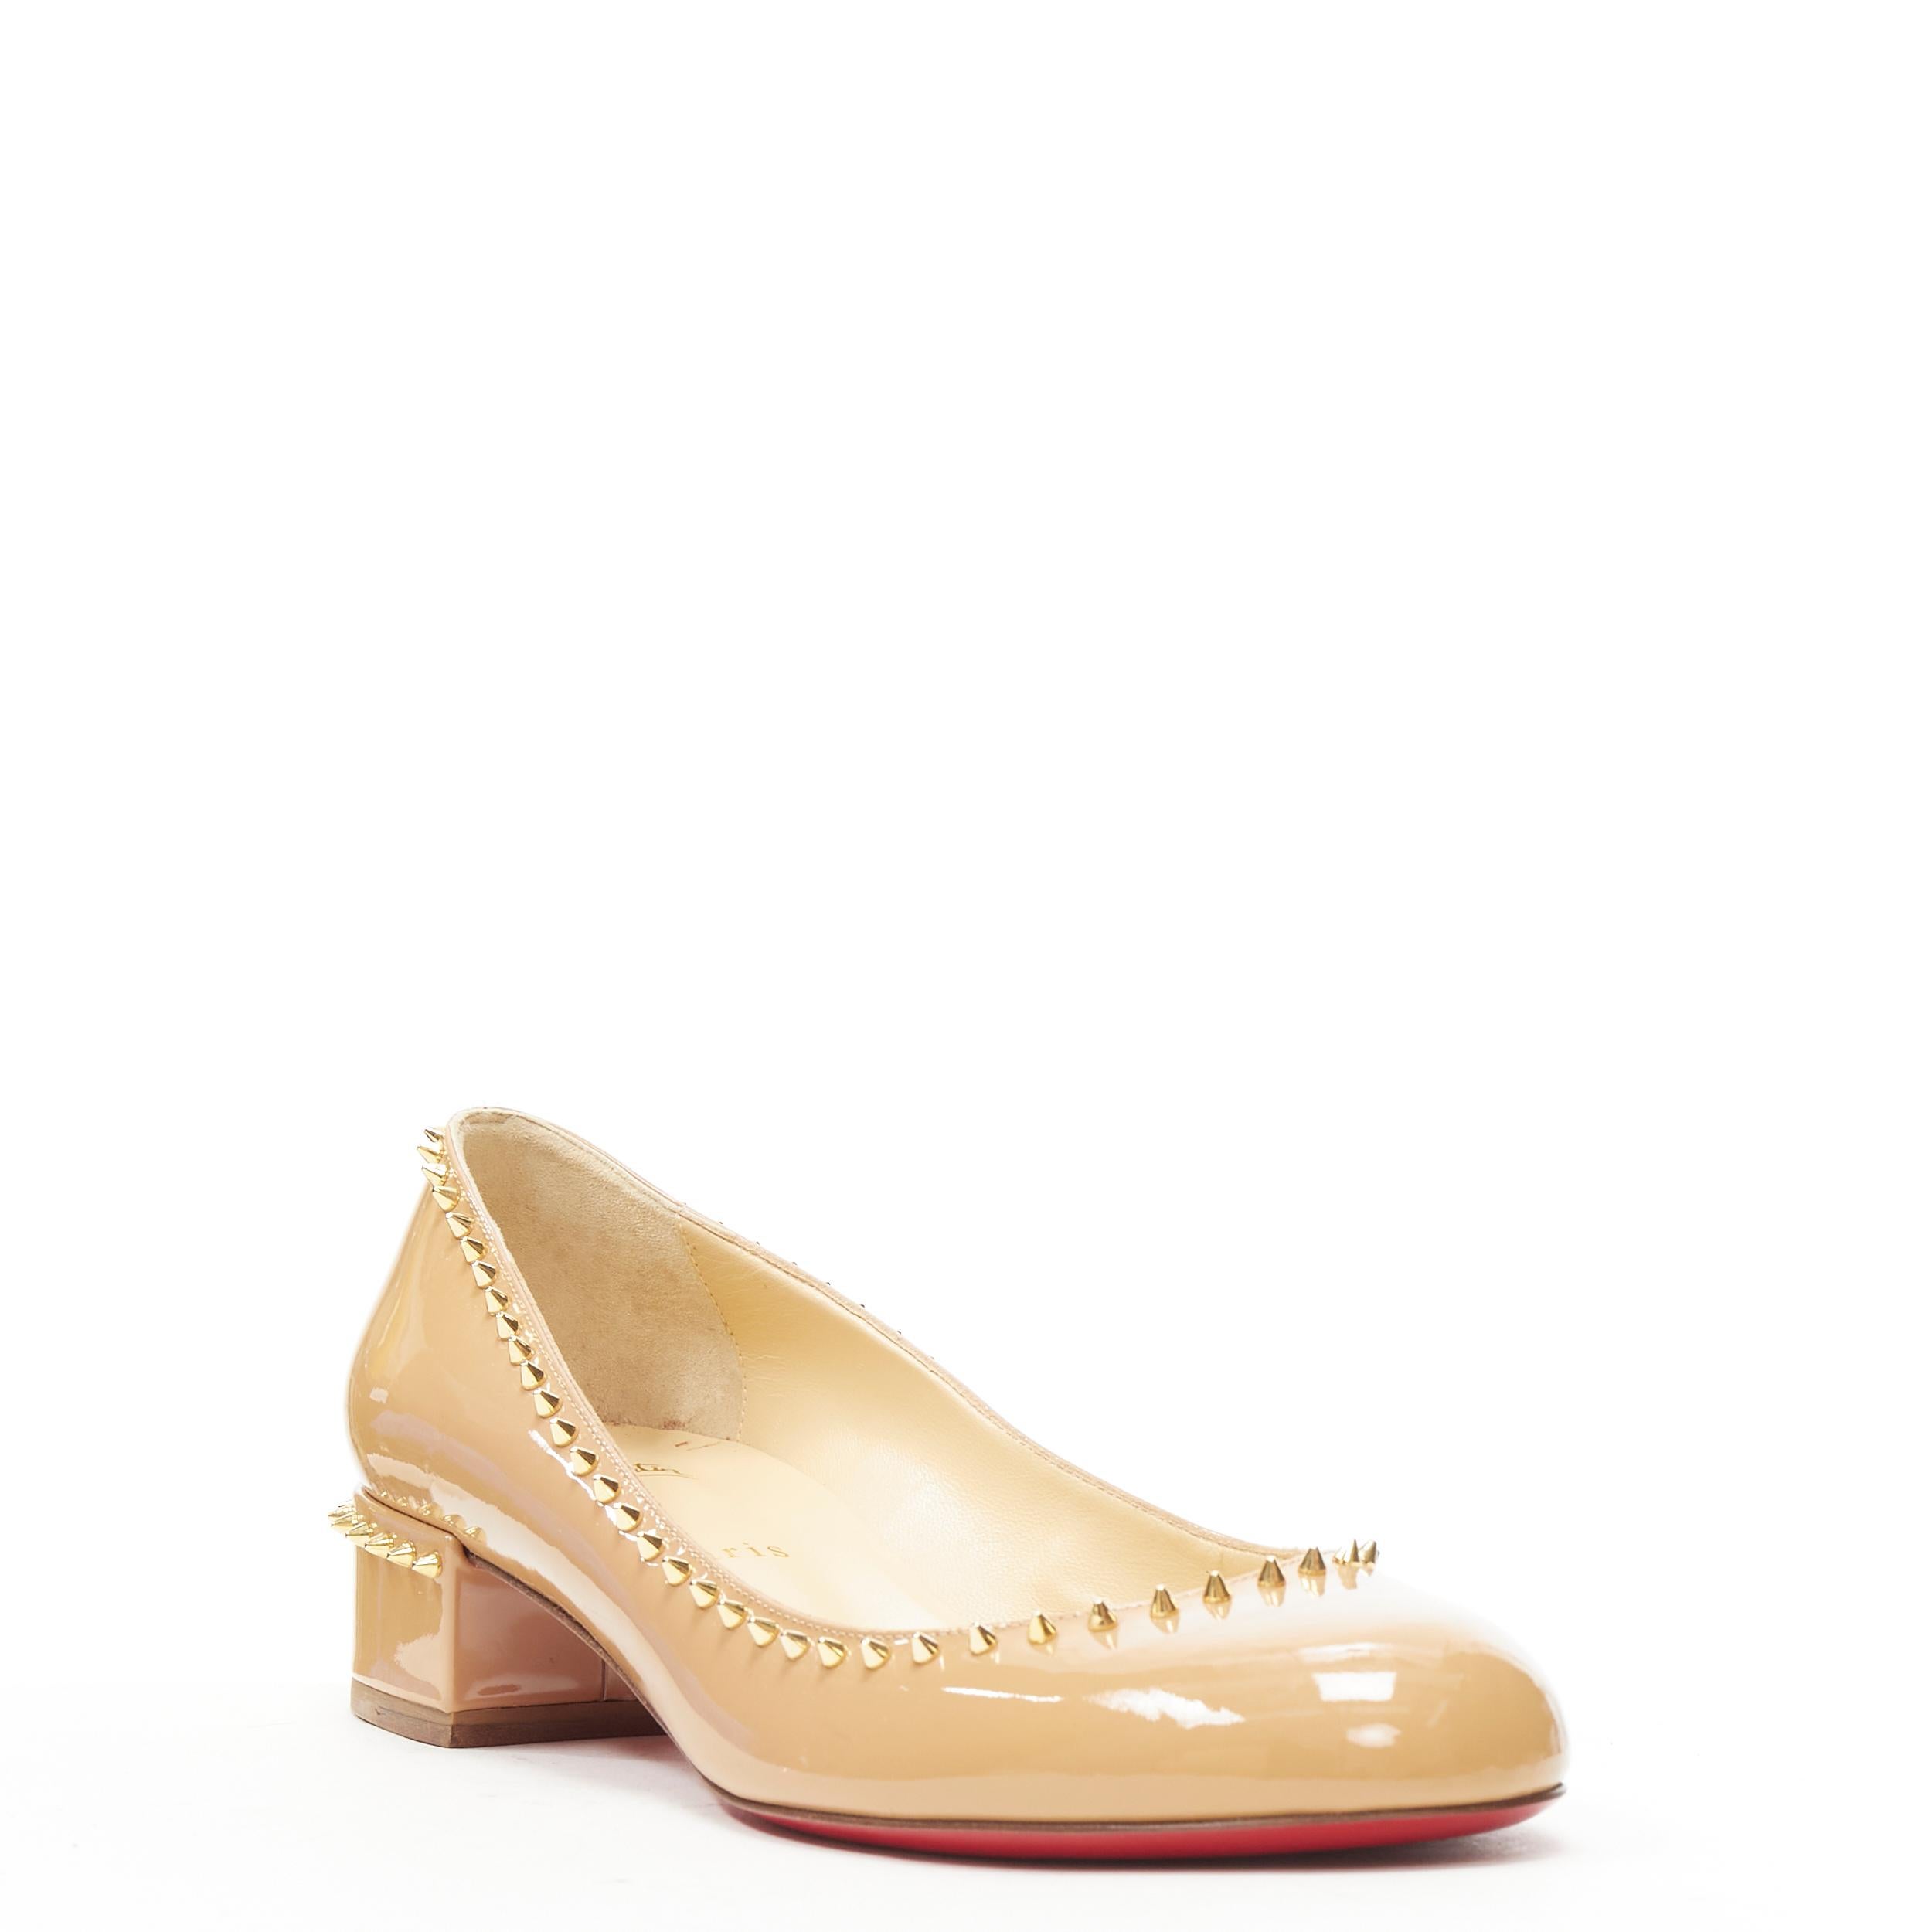 new CHRISTIAN LOUBOUTIN Treliliane nude patent gold spike stud block heel EU39 
Reference: TGAS/B01099
Brand: Christian Louboutin 
Designer: Christian Louboutin 
Model: Treliliane nude patent block 
Material: Patent Leather 
Color: Beige 
Pattern: